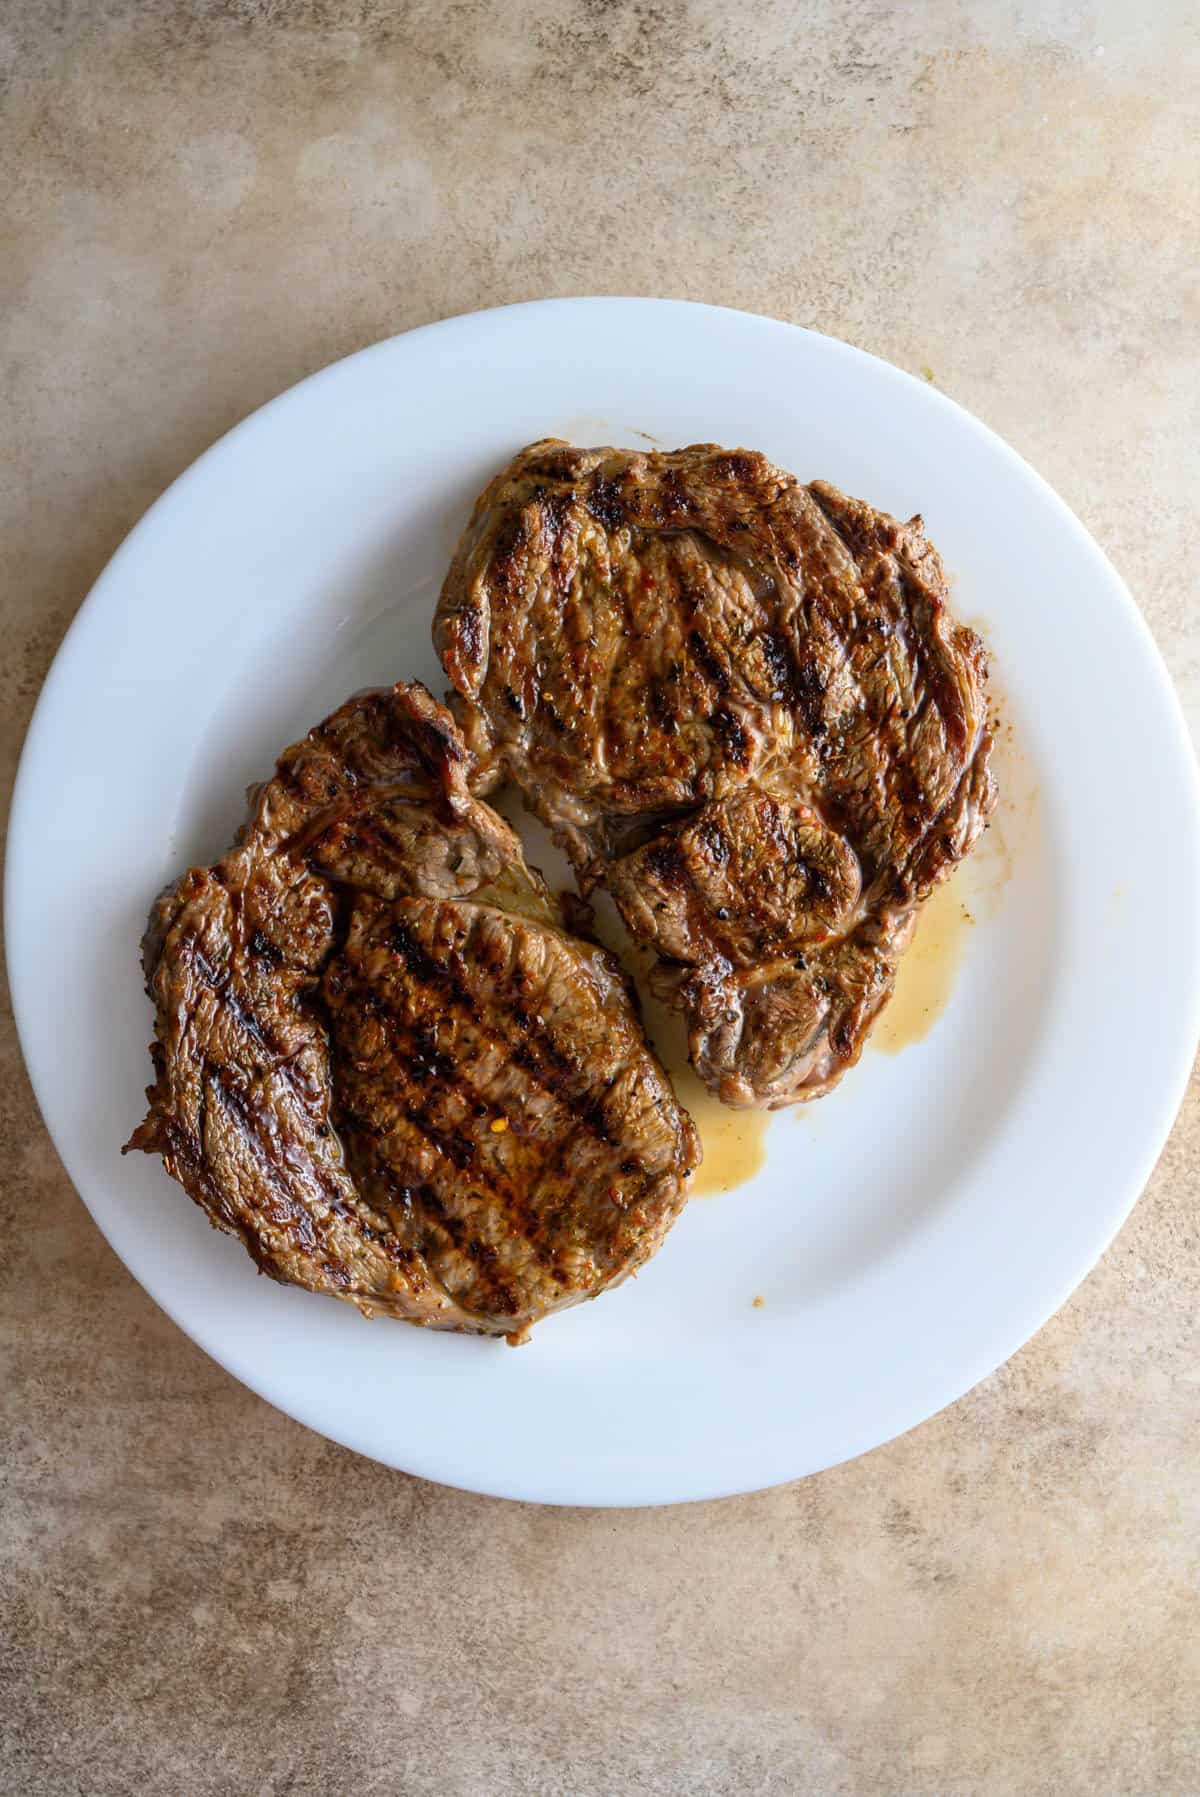 Grilled steaks resting on a plate.